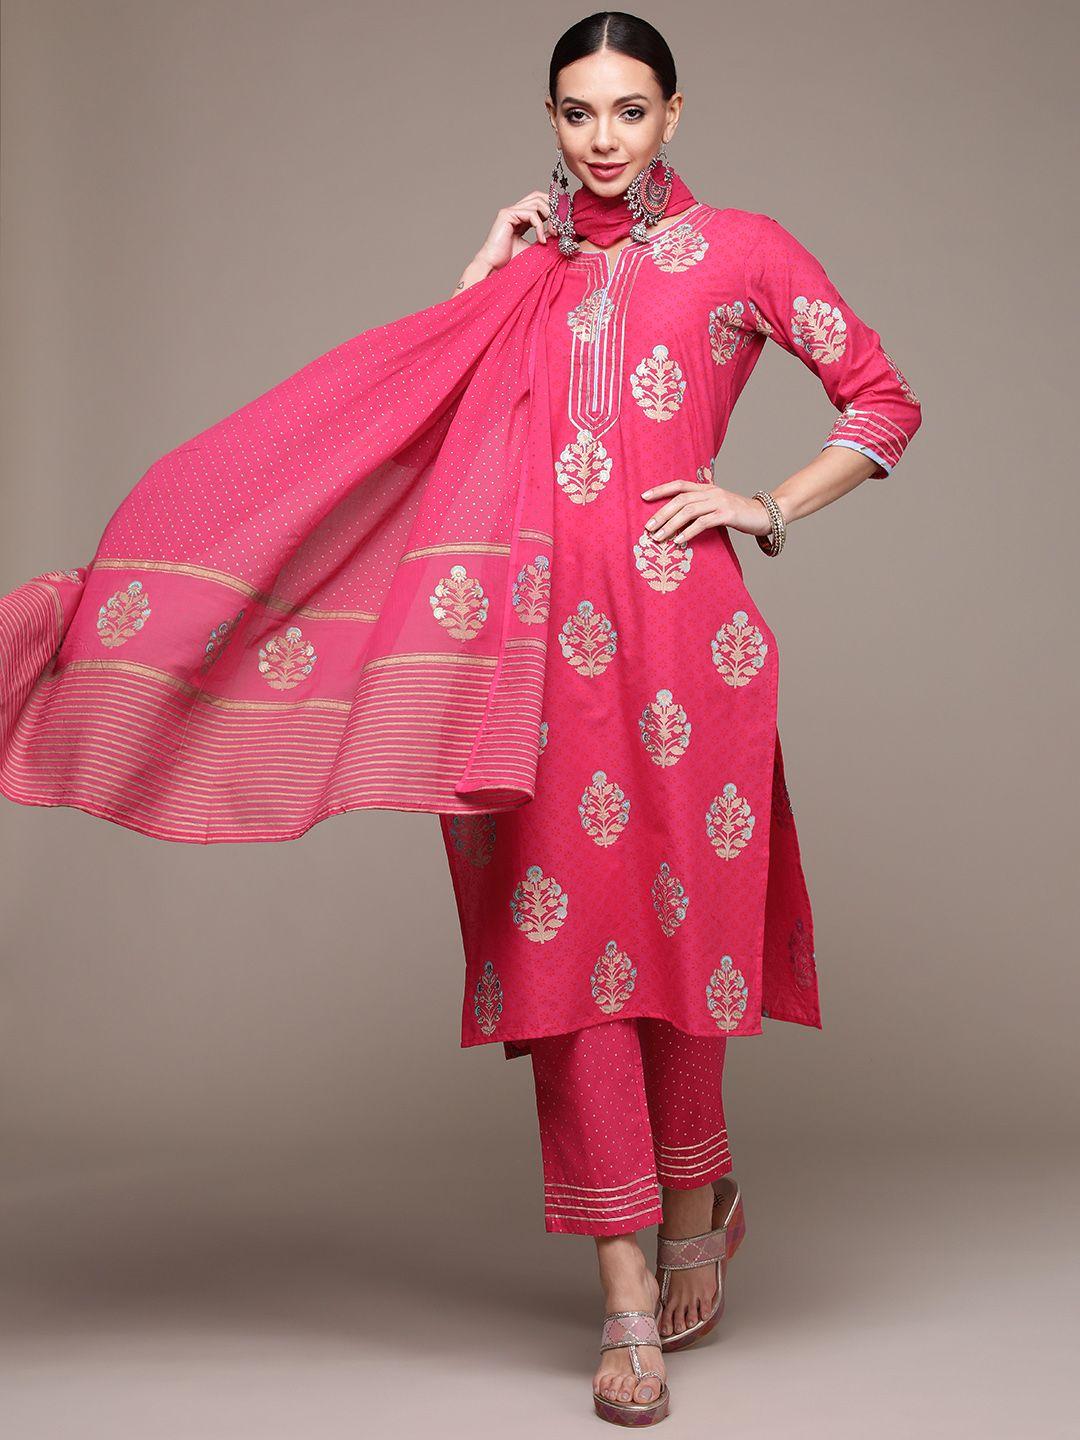 anubhutee-women-pink-floral-printed-pure-cotton-kurta-with-trousers-&-with-dupatta